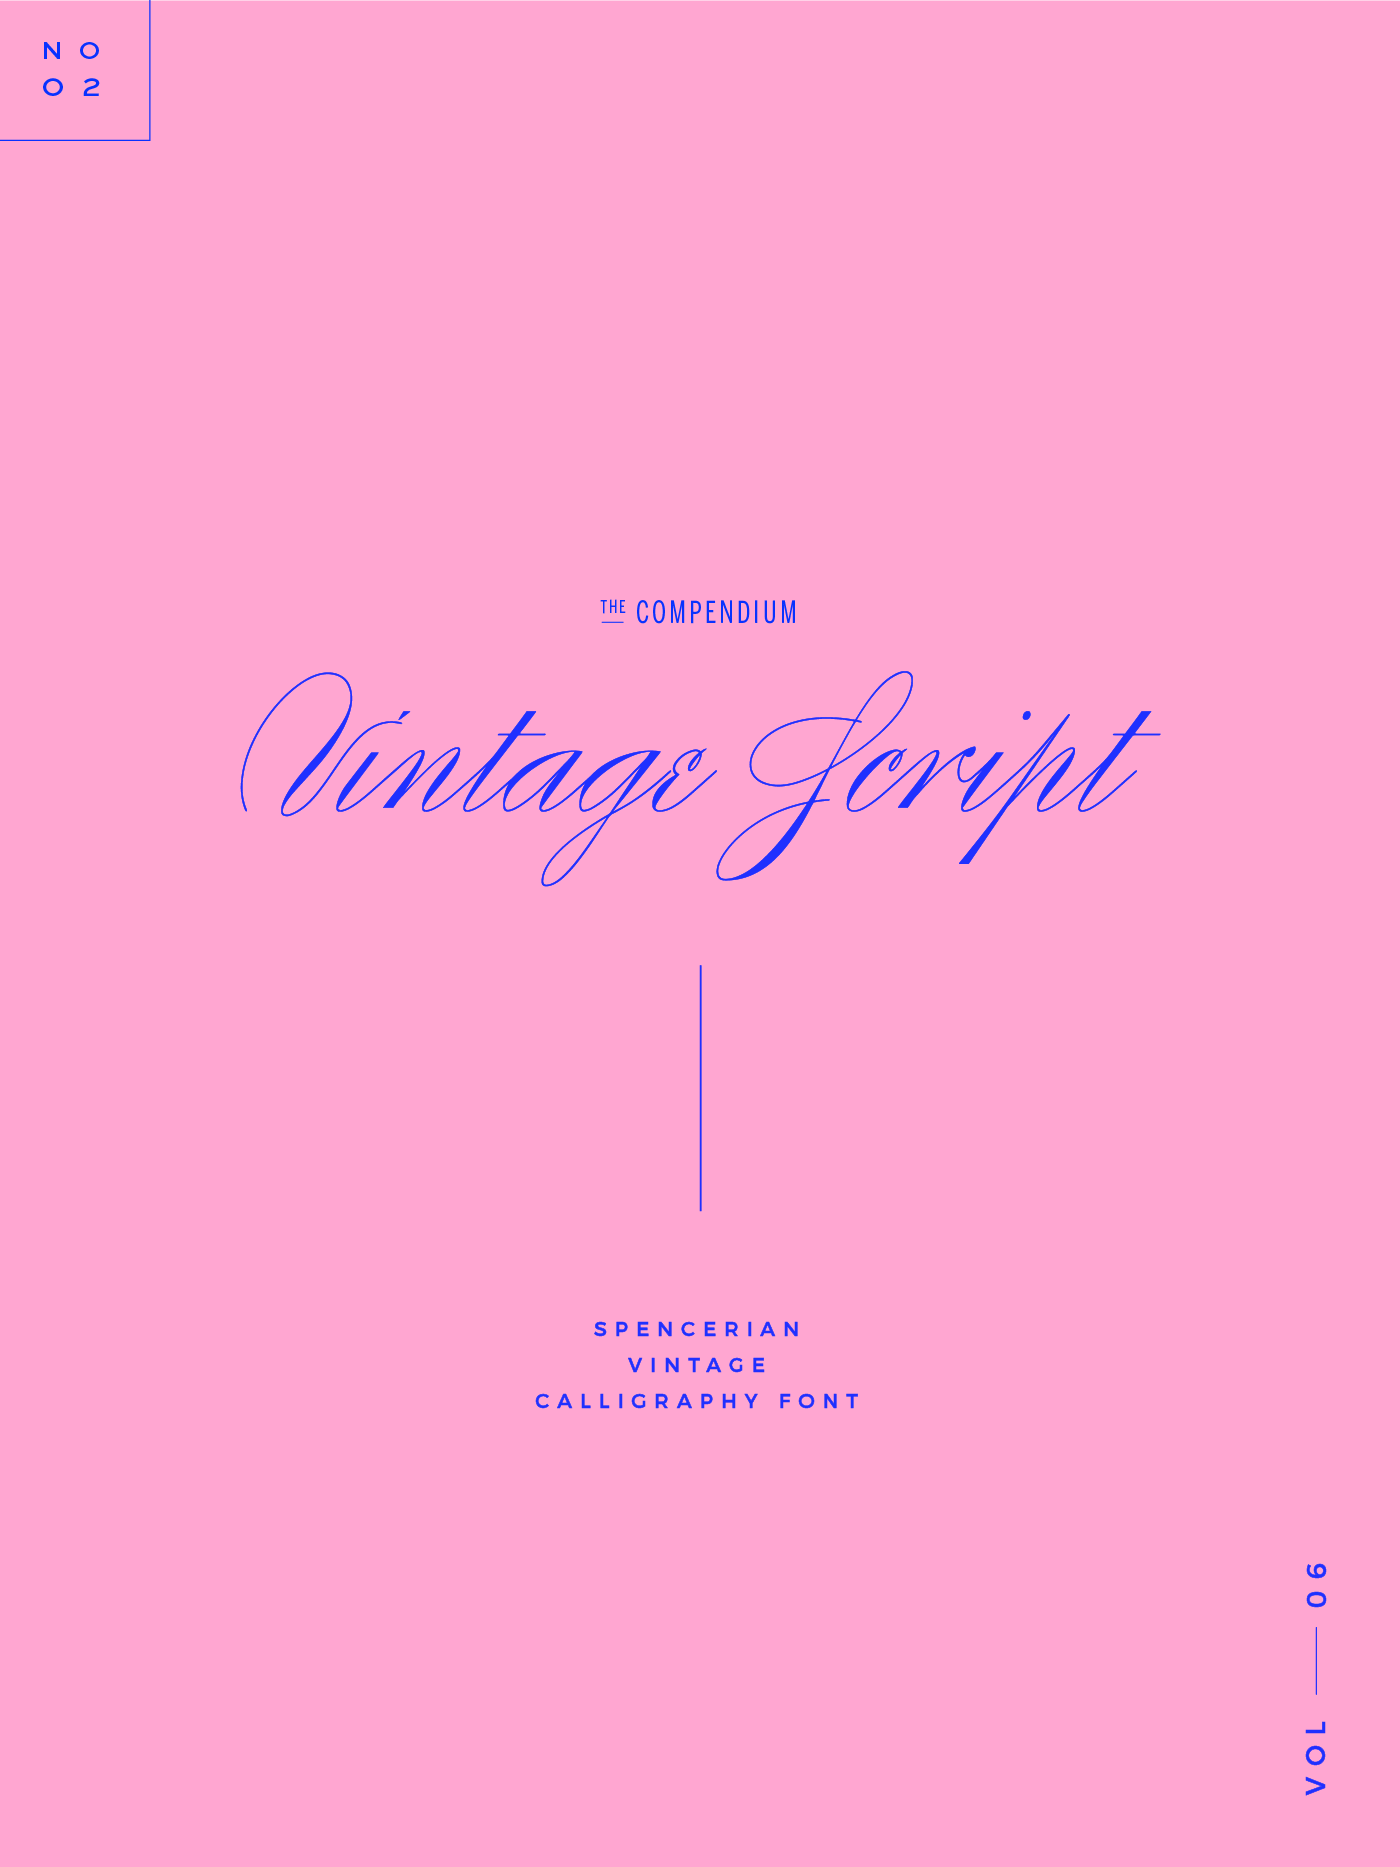 Favorite Fonts of the Month